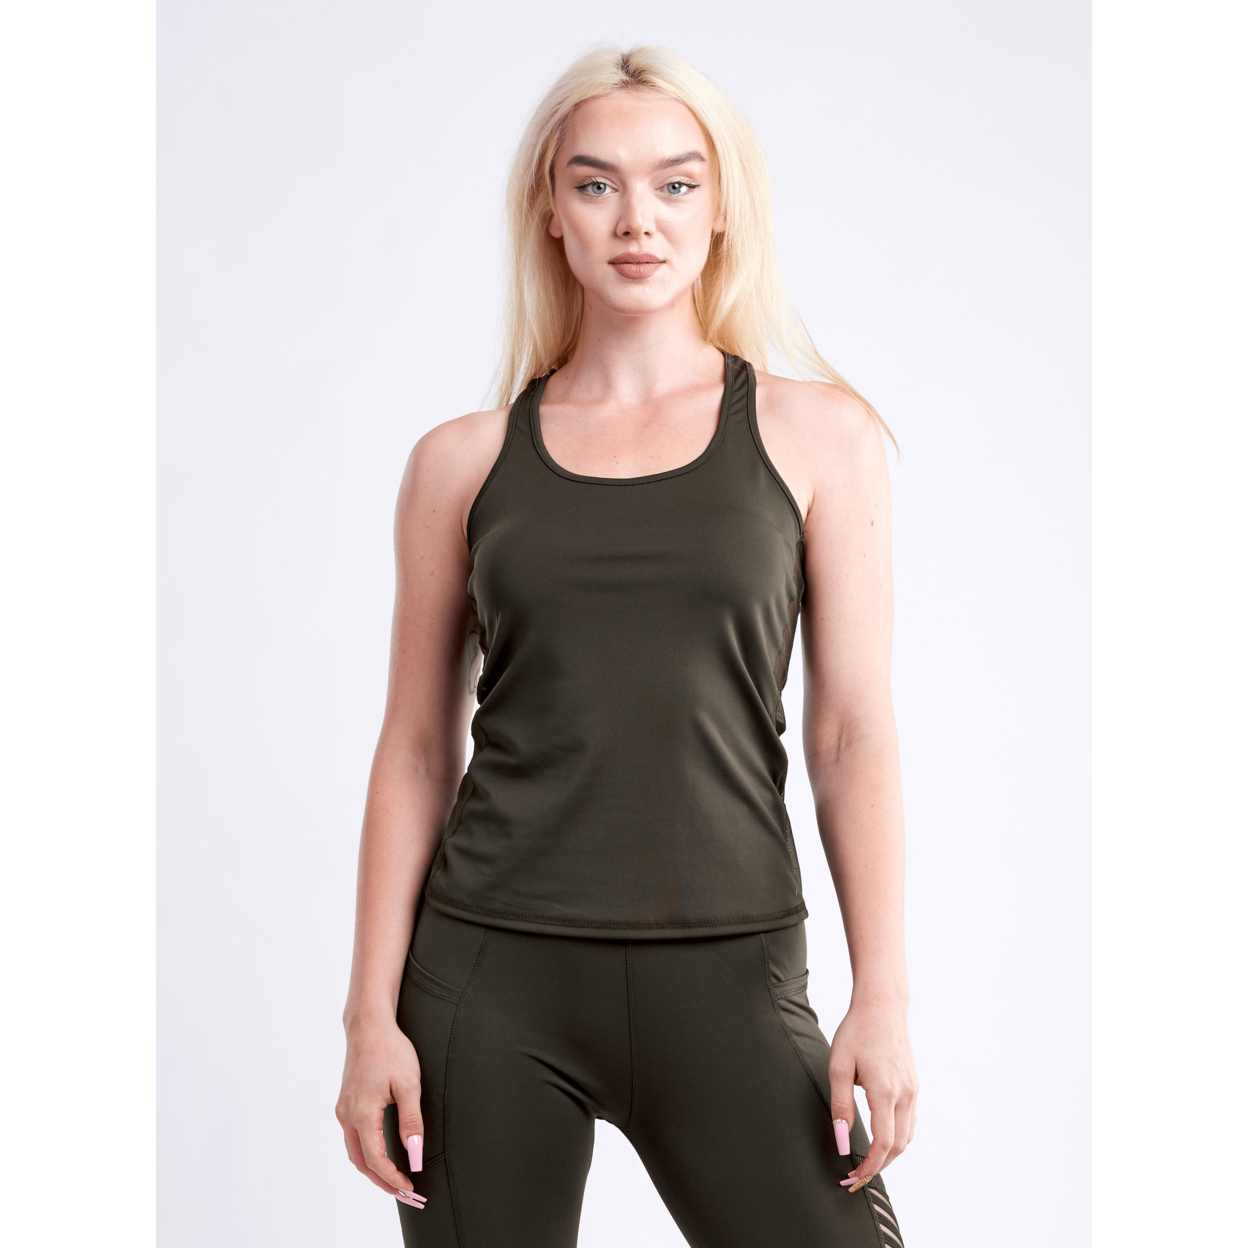 Sports Tank Top With Side Mesh Panels - Olive Green, Small / Medium